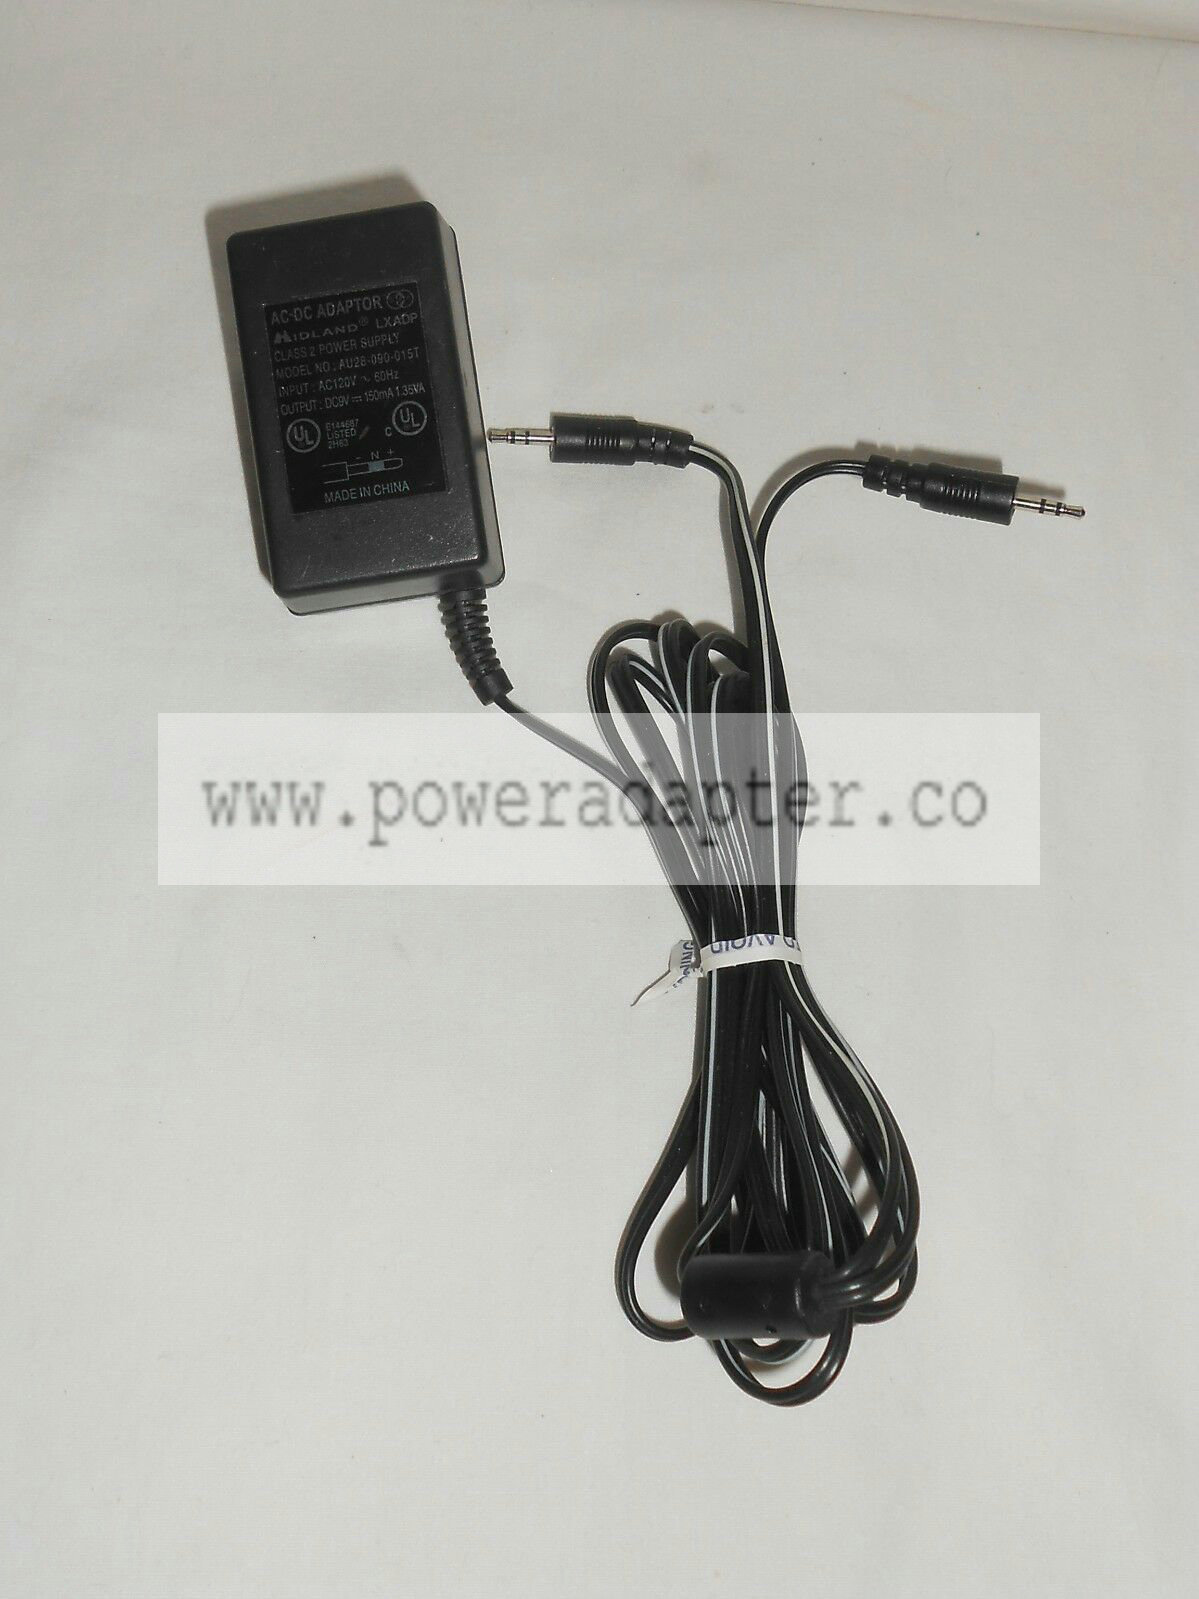 Midland LXADP AC Adapter Model AU28-090-015T Dual Male Plugs 9V Model: AU28-090-015T Output Voltage: 9V MPN: Does N - Click Image to Close